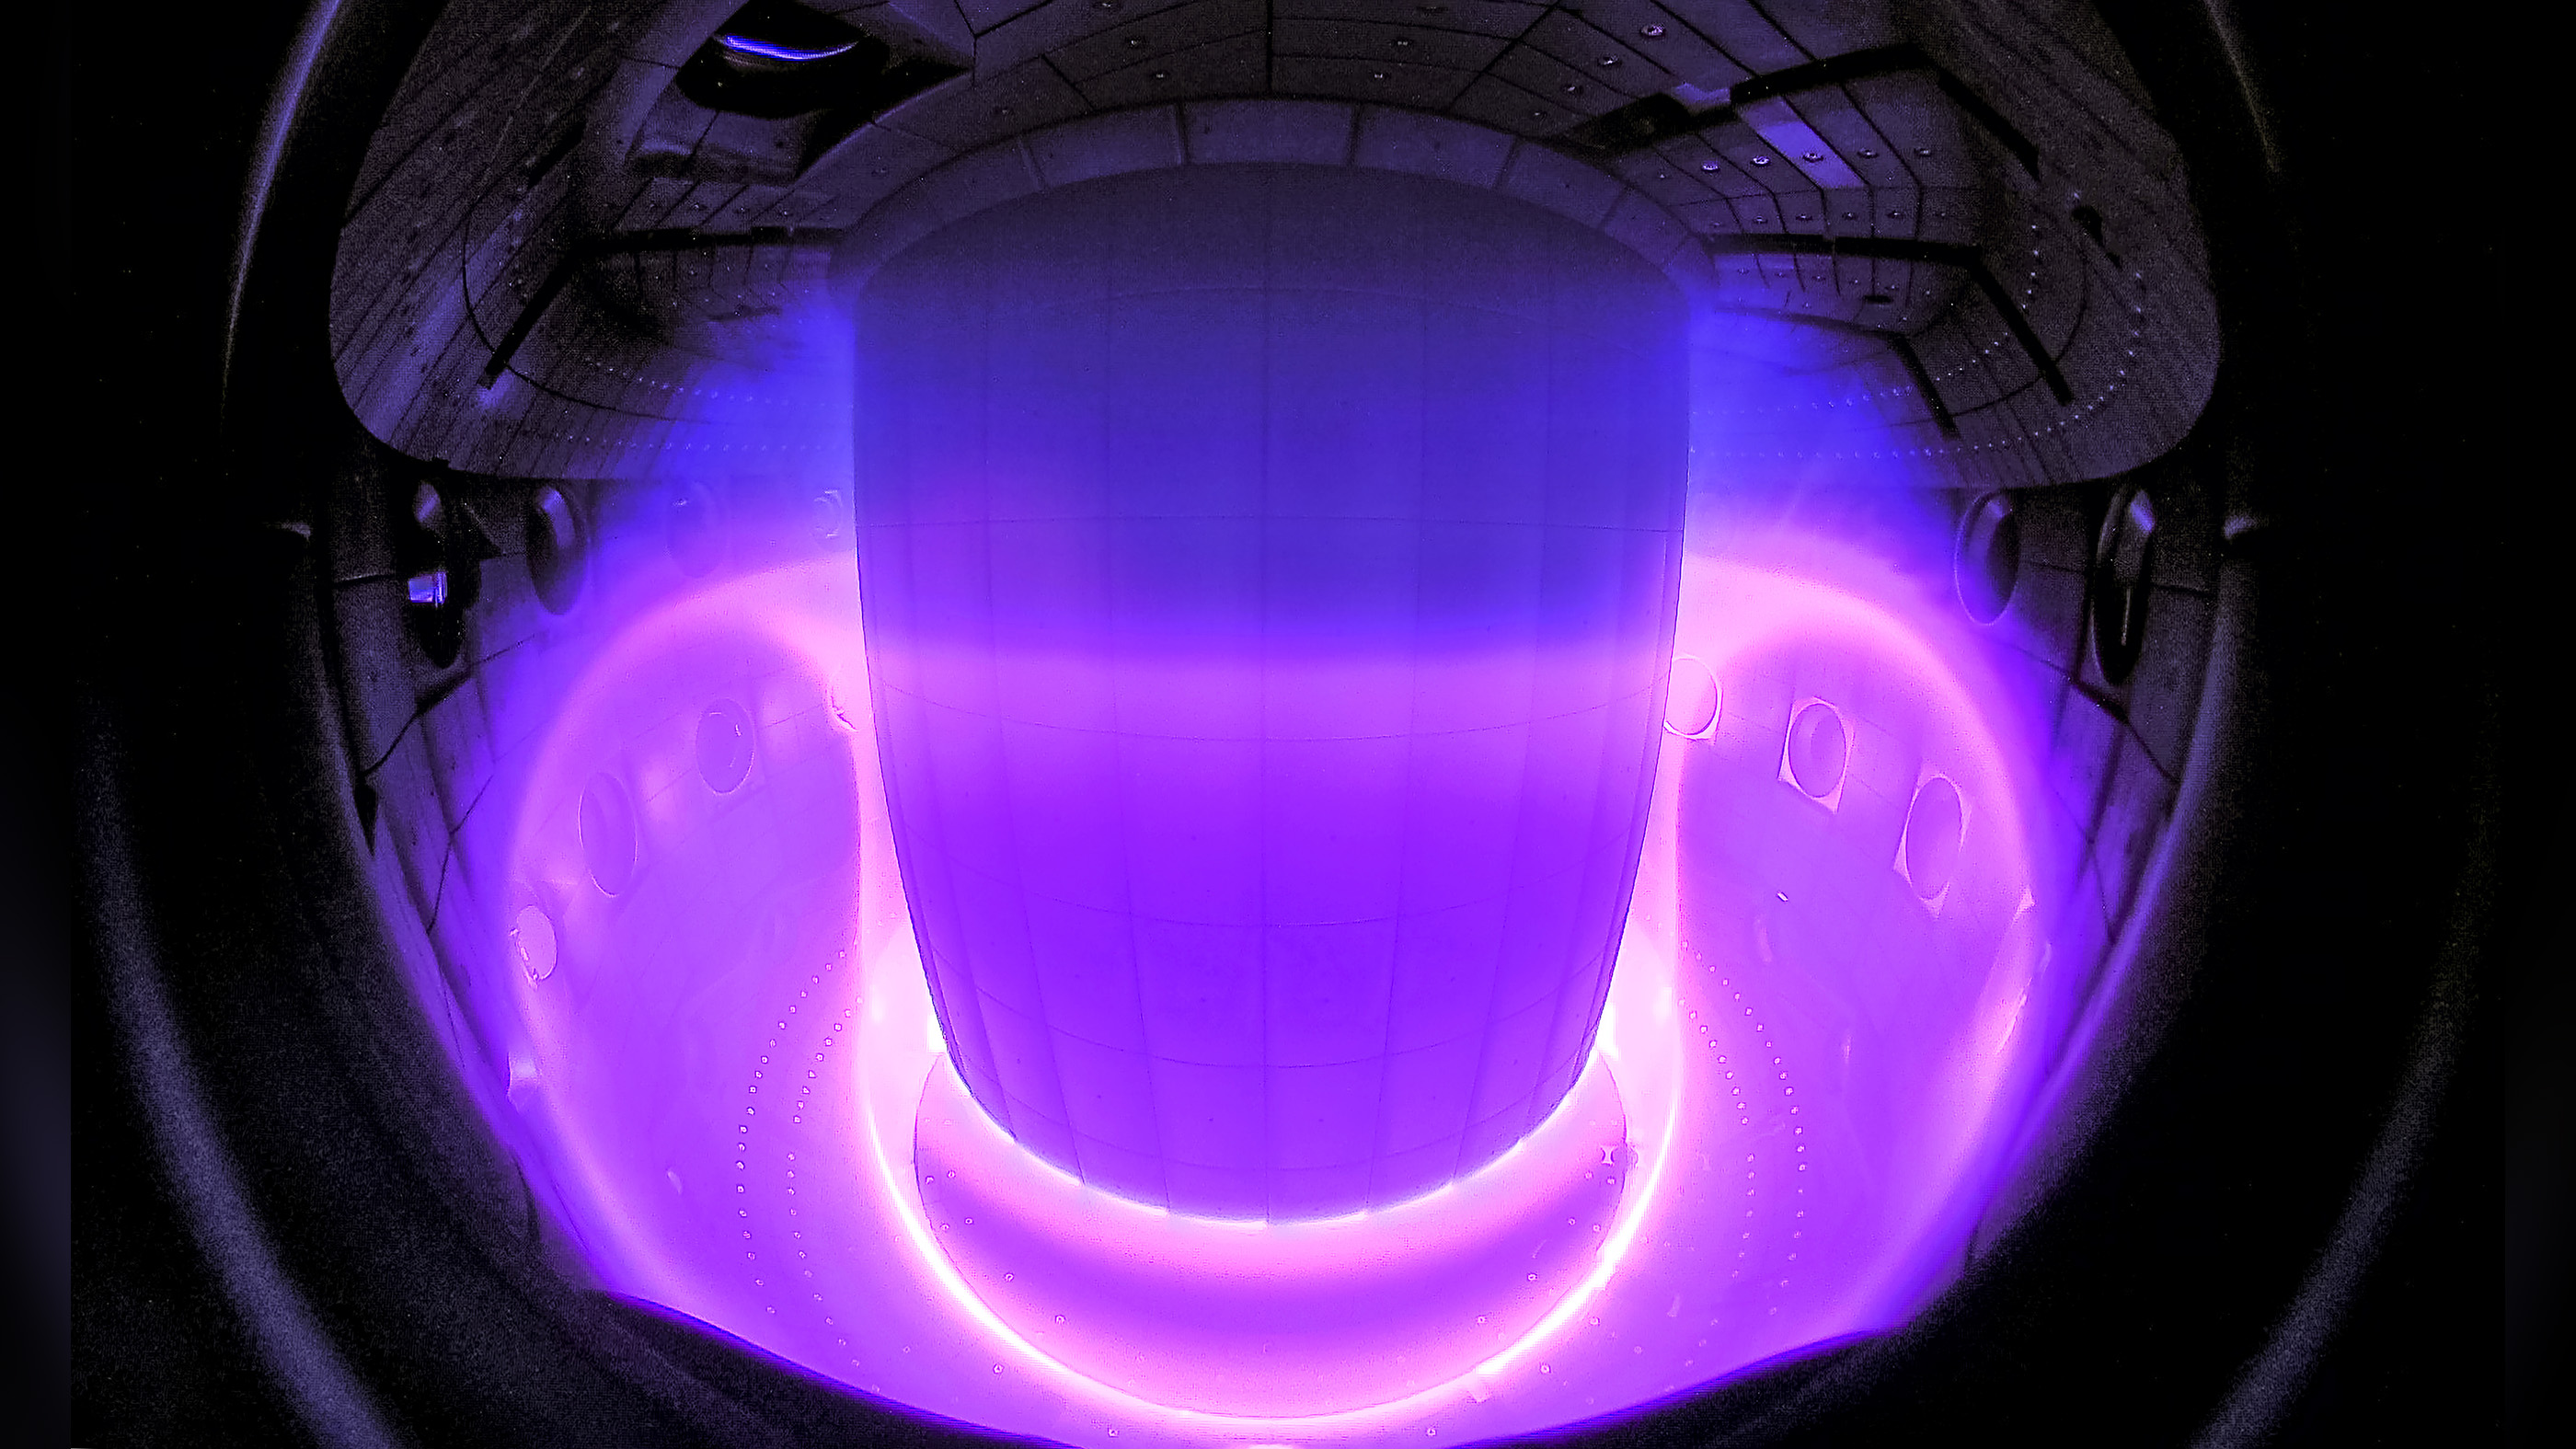 The experimental TCV tokamak at Lausanne in Switzerland is used to test the behavior of hydrogen plasmas that will serve as fuel in future fusion reactors.